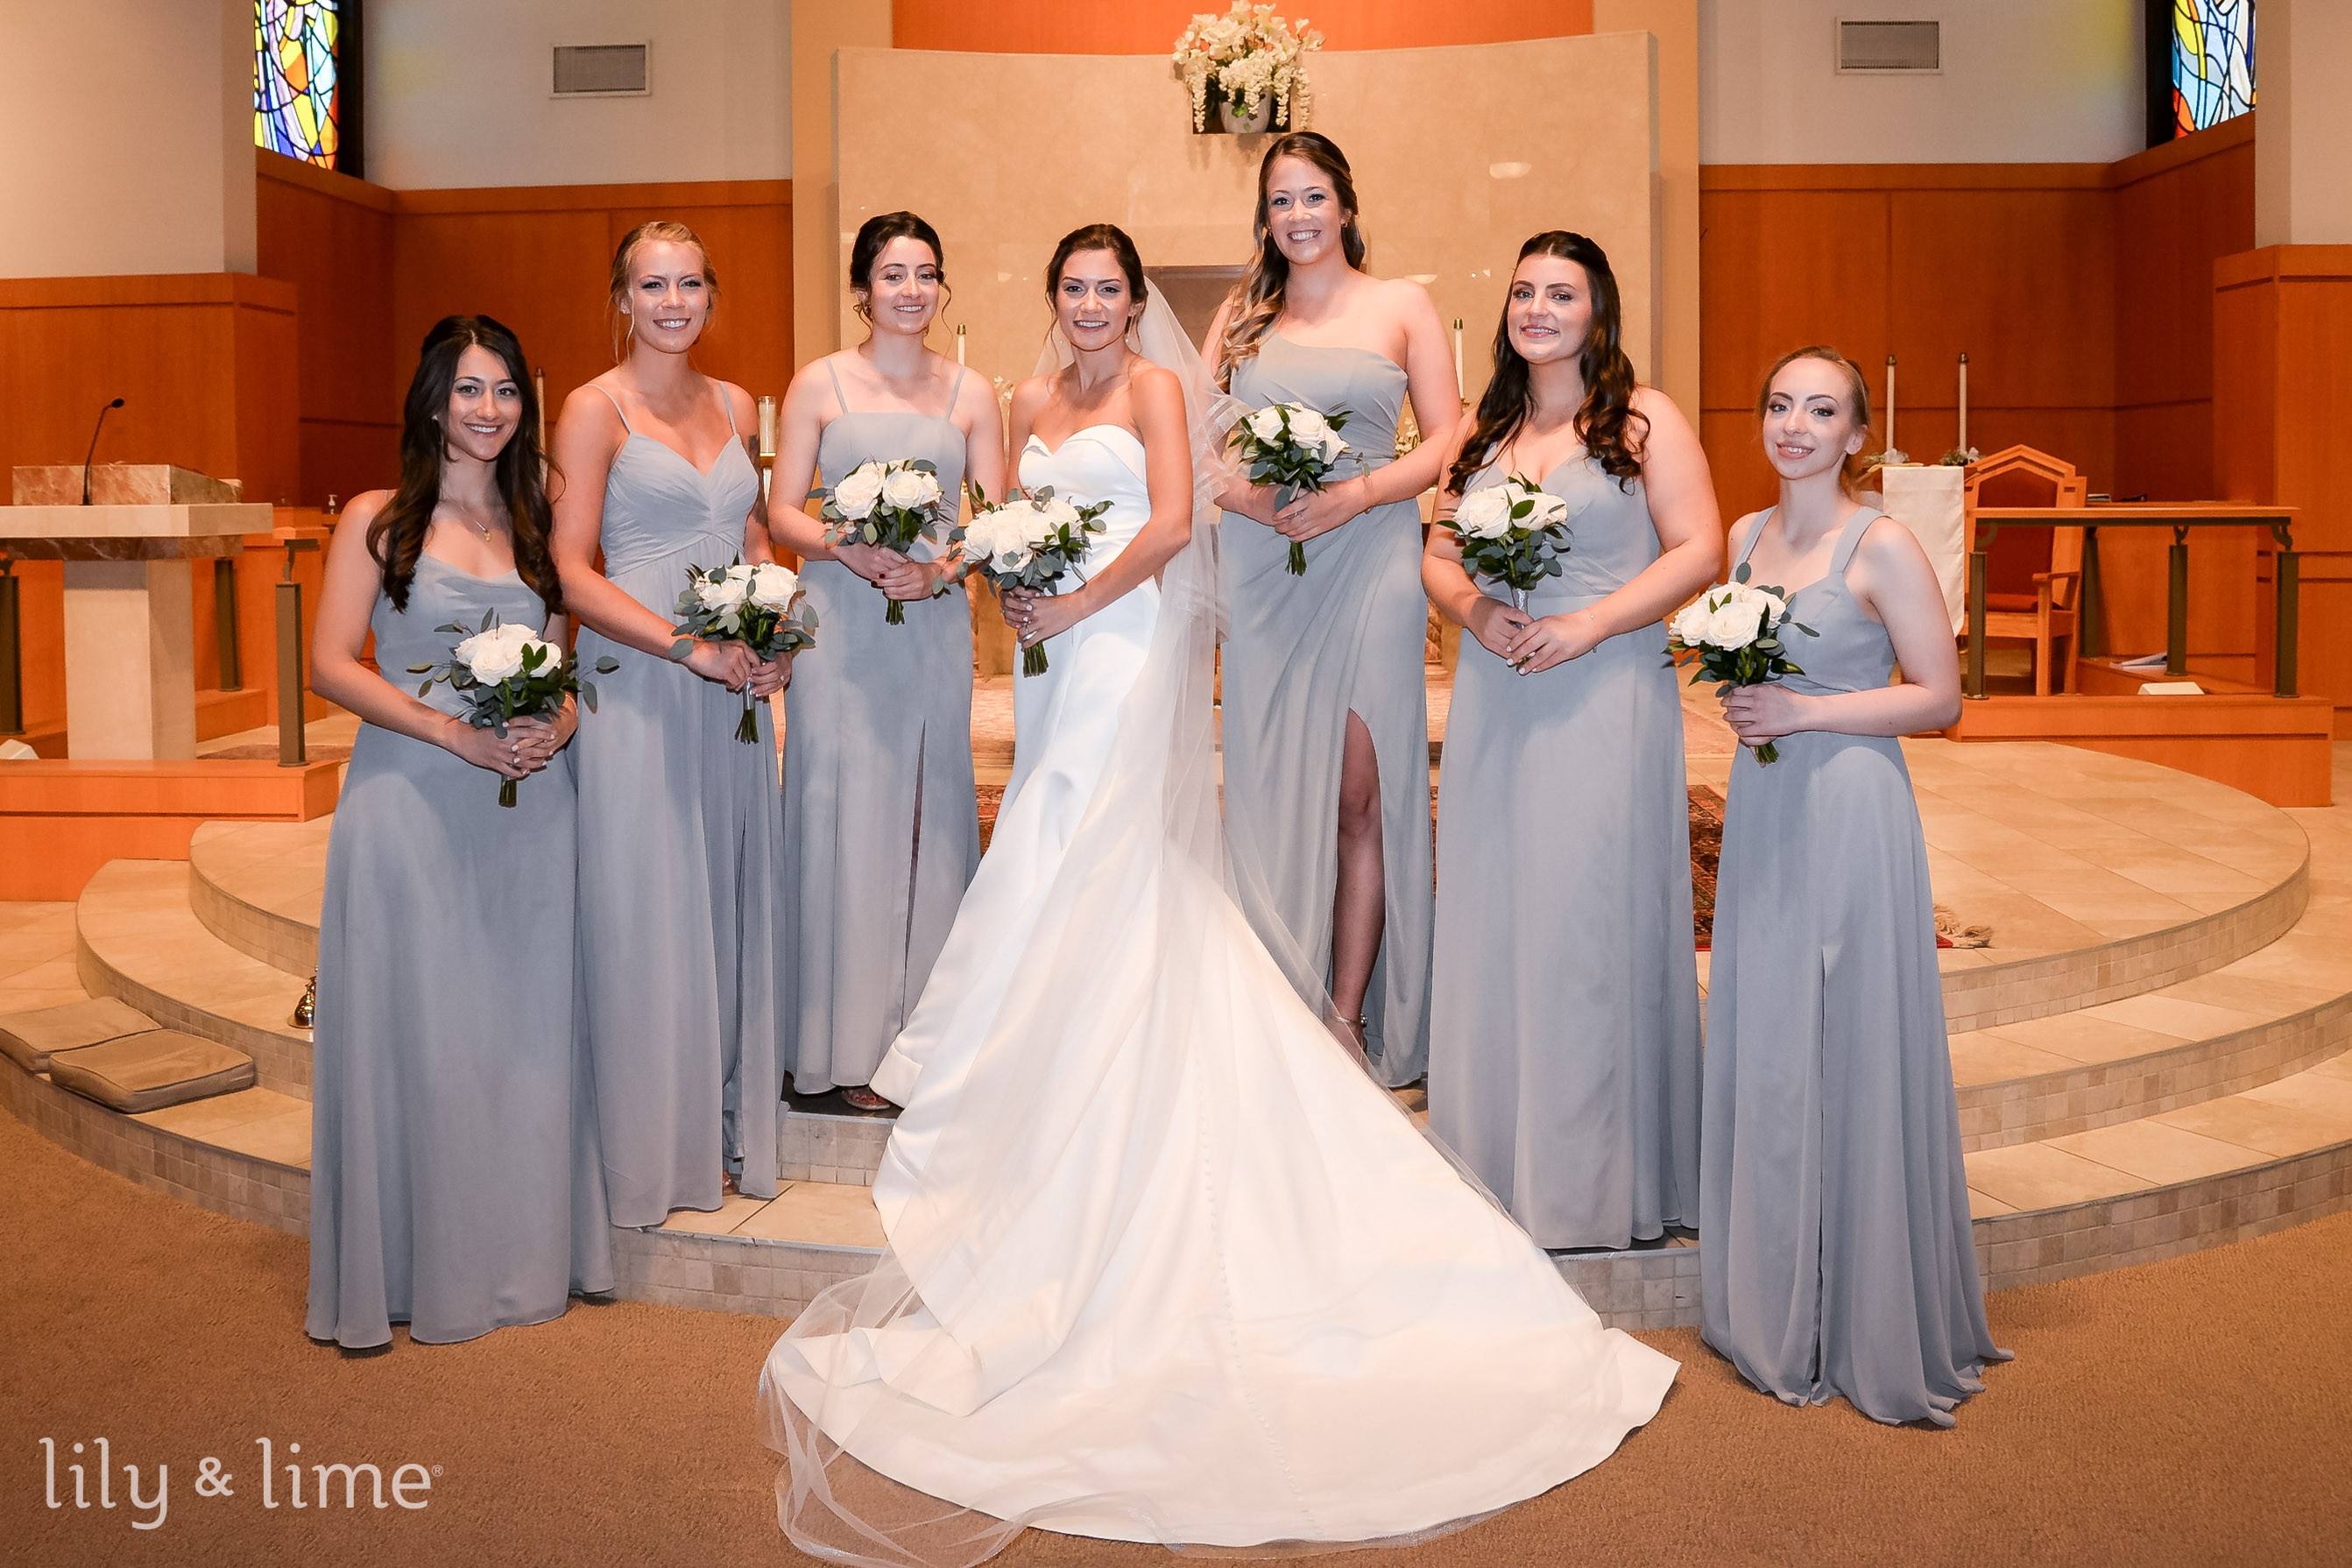 5 Bridal Party Looks We're Crushing on for Spring & Summer